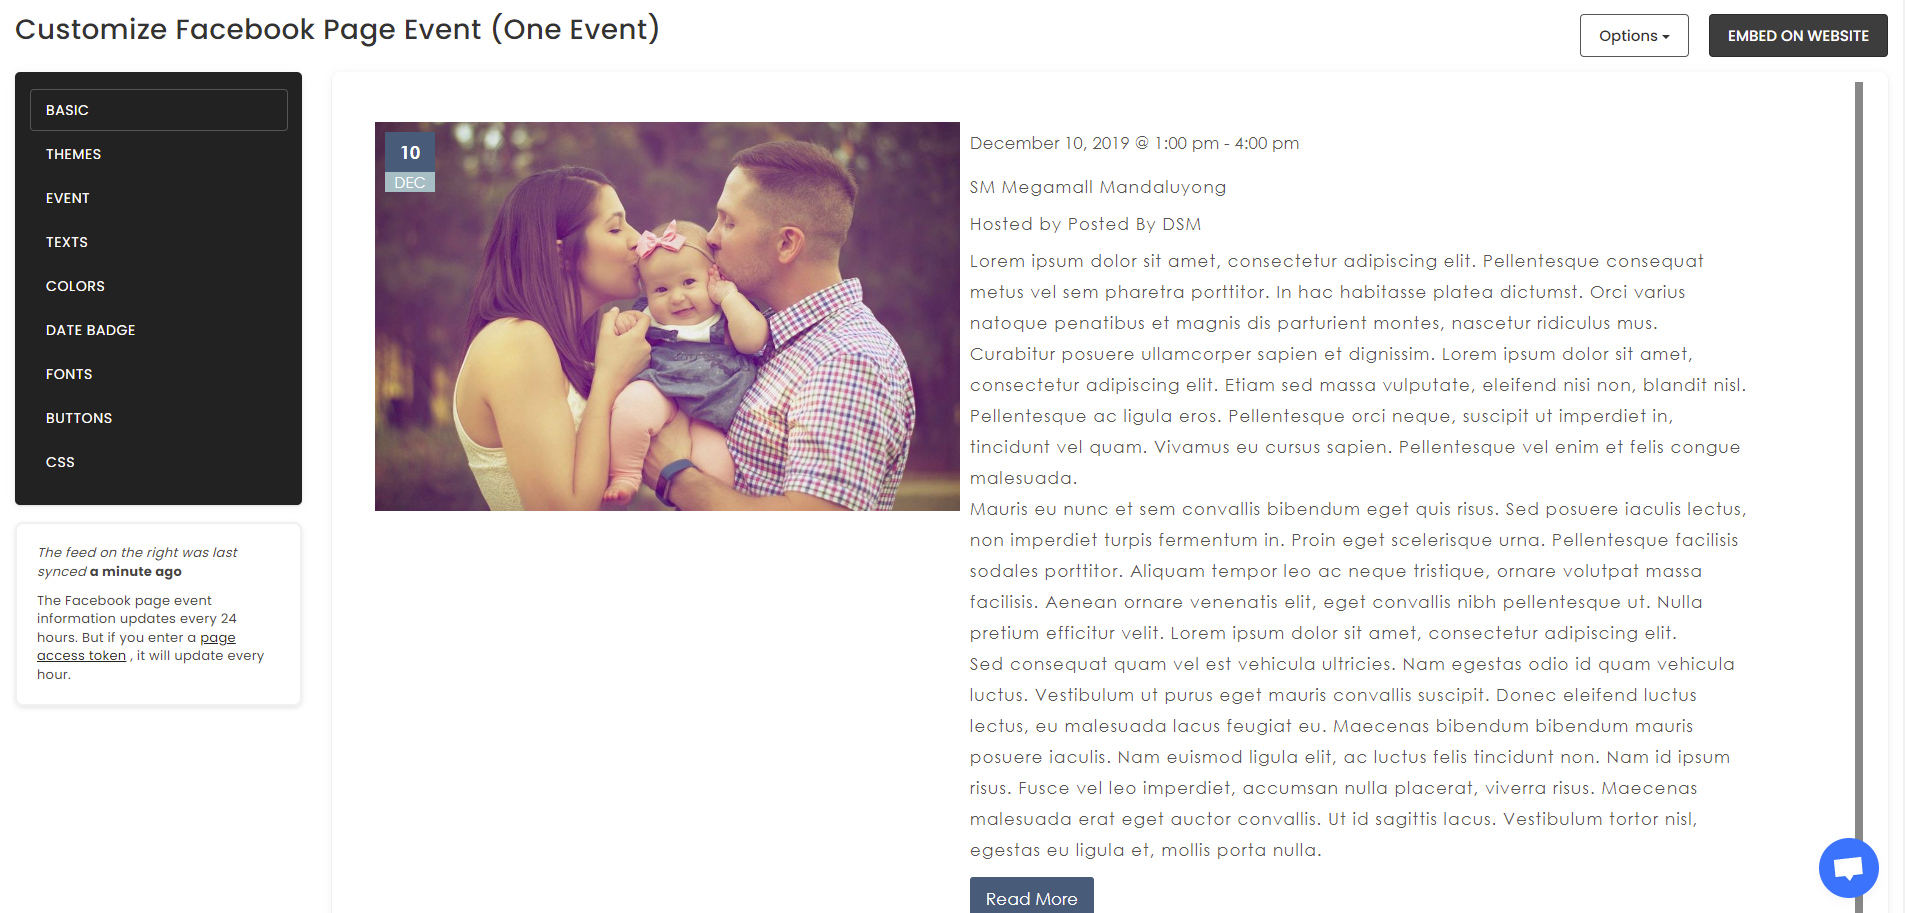 Customize your feed - How To Embed Facebook Page Event (One Event) On Wix Website For Free?